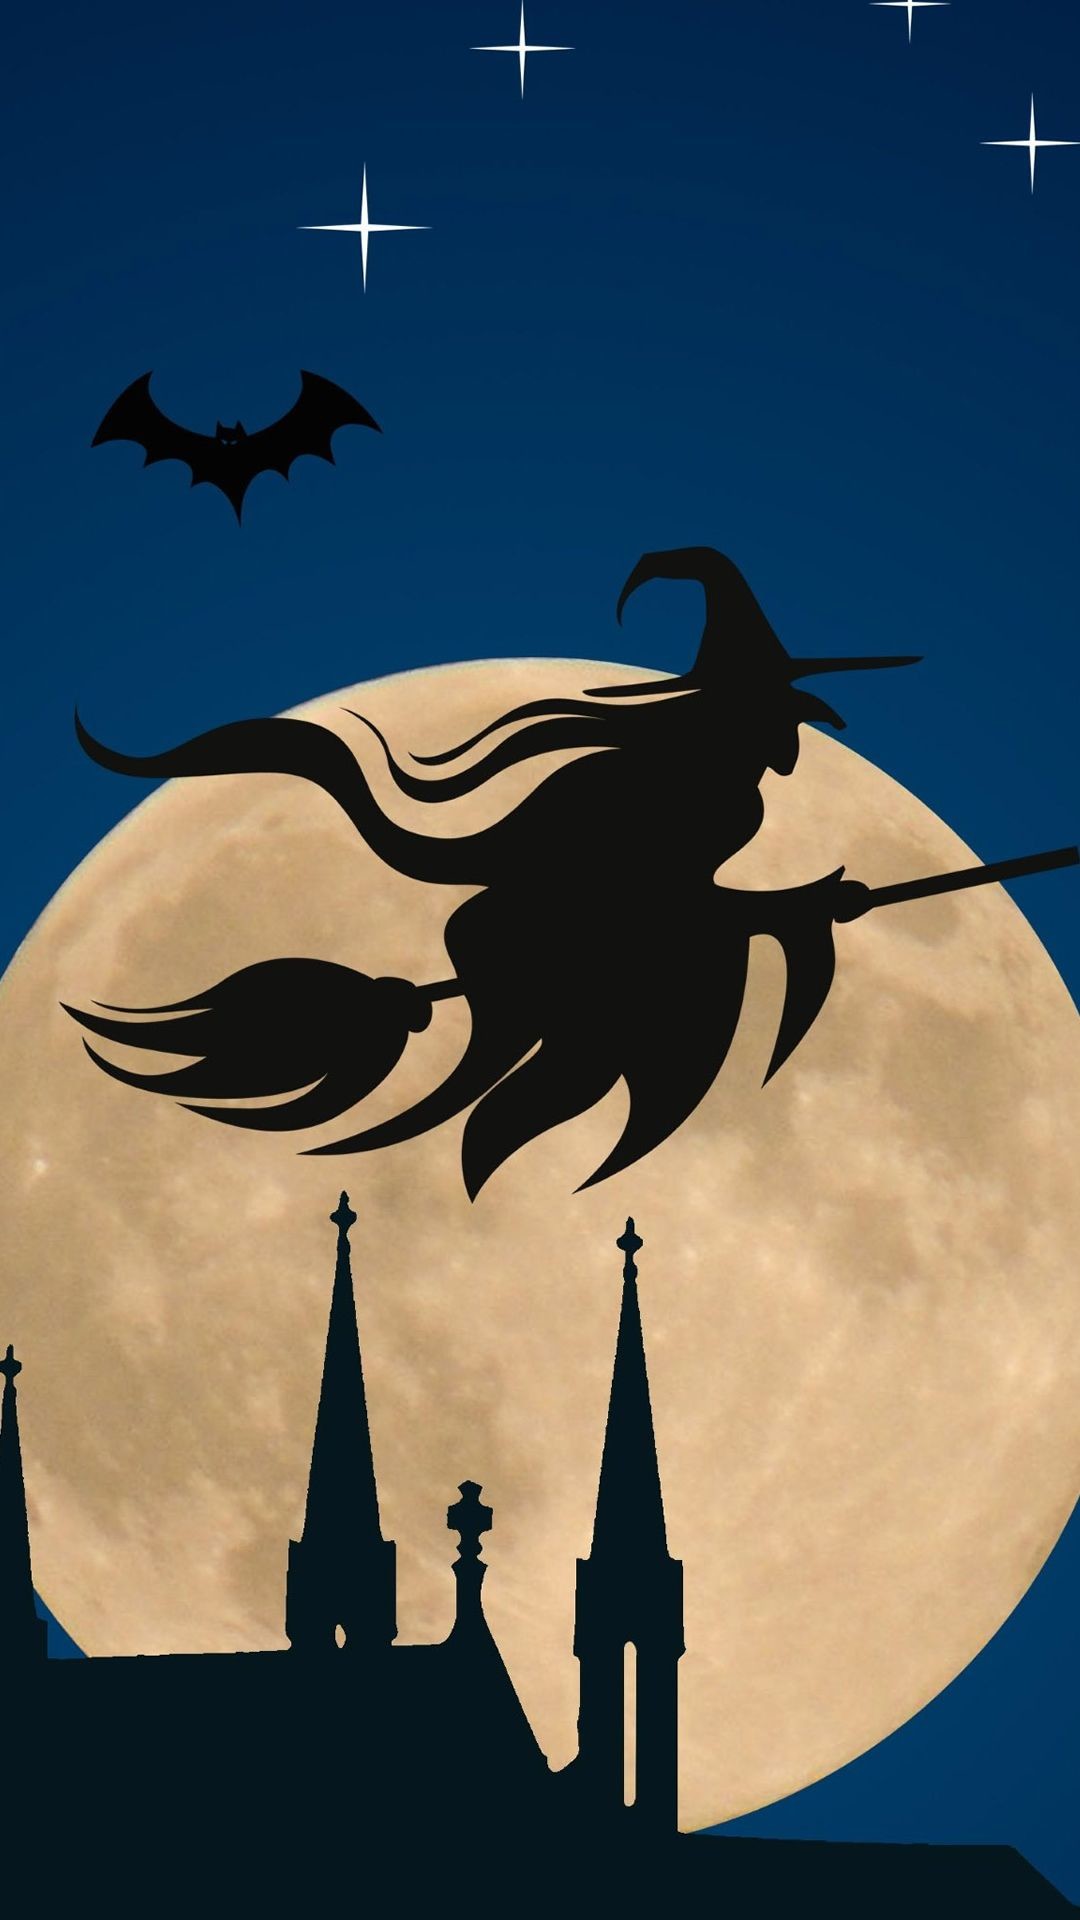 1080x1920, Halloween Witch Flying Broom Over Moon - Halloween Wallpaper Witch , HD Wallpaper & Backgrounds